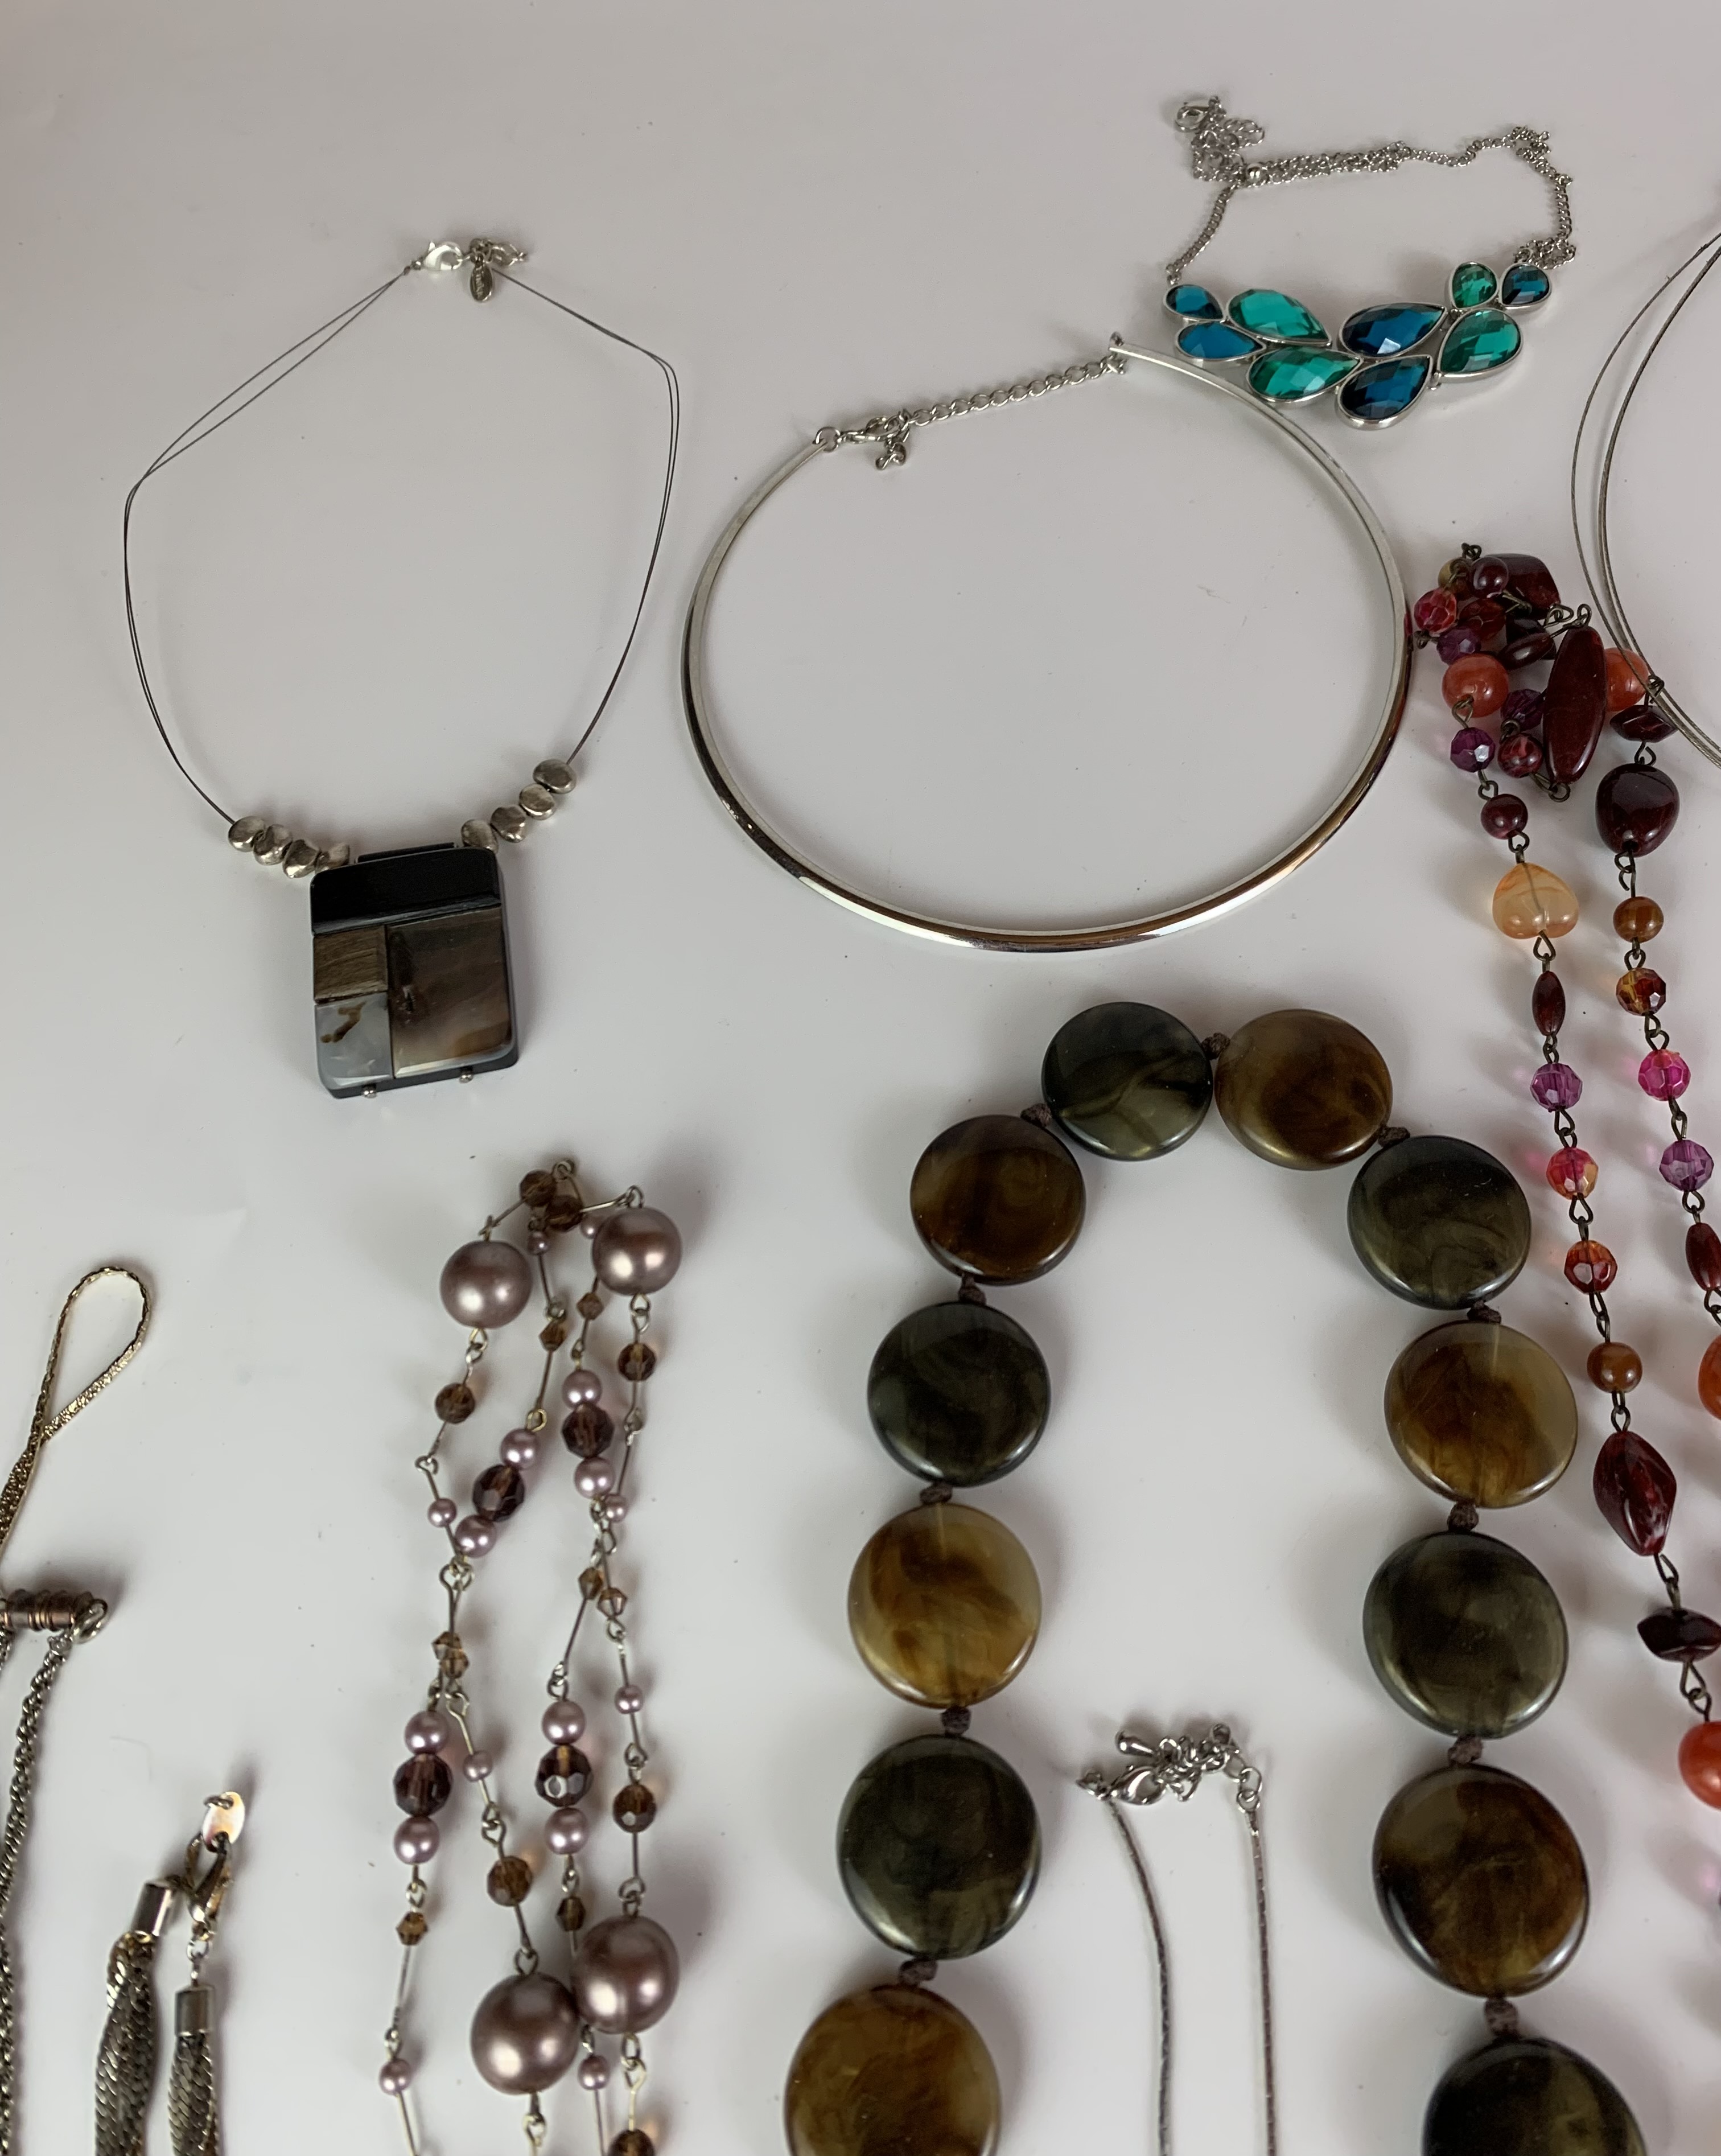 Dress jewellery including necklaces, beads, bracelets, rings etc. - Image 6 of 14